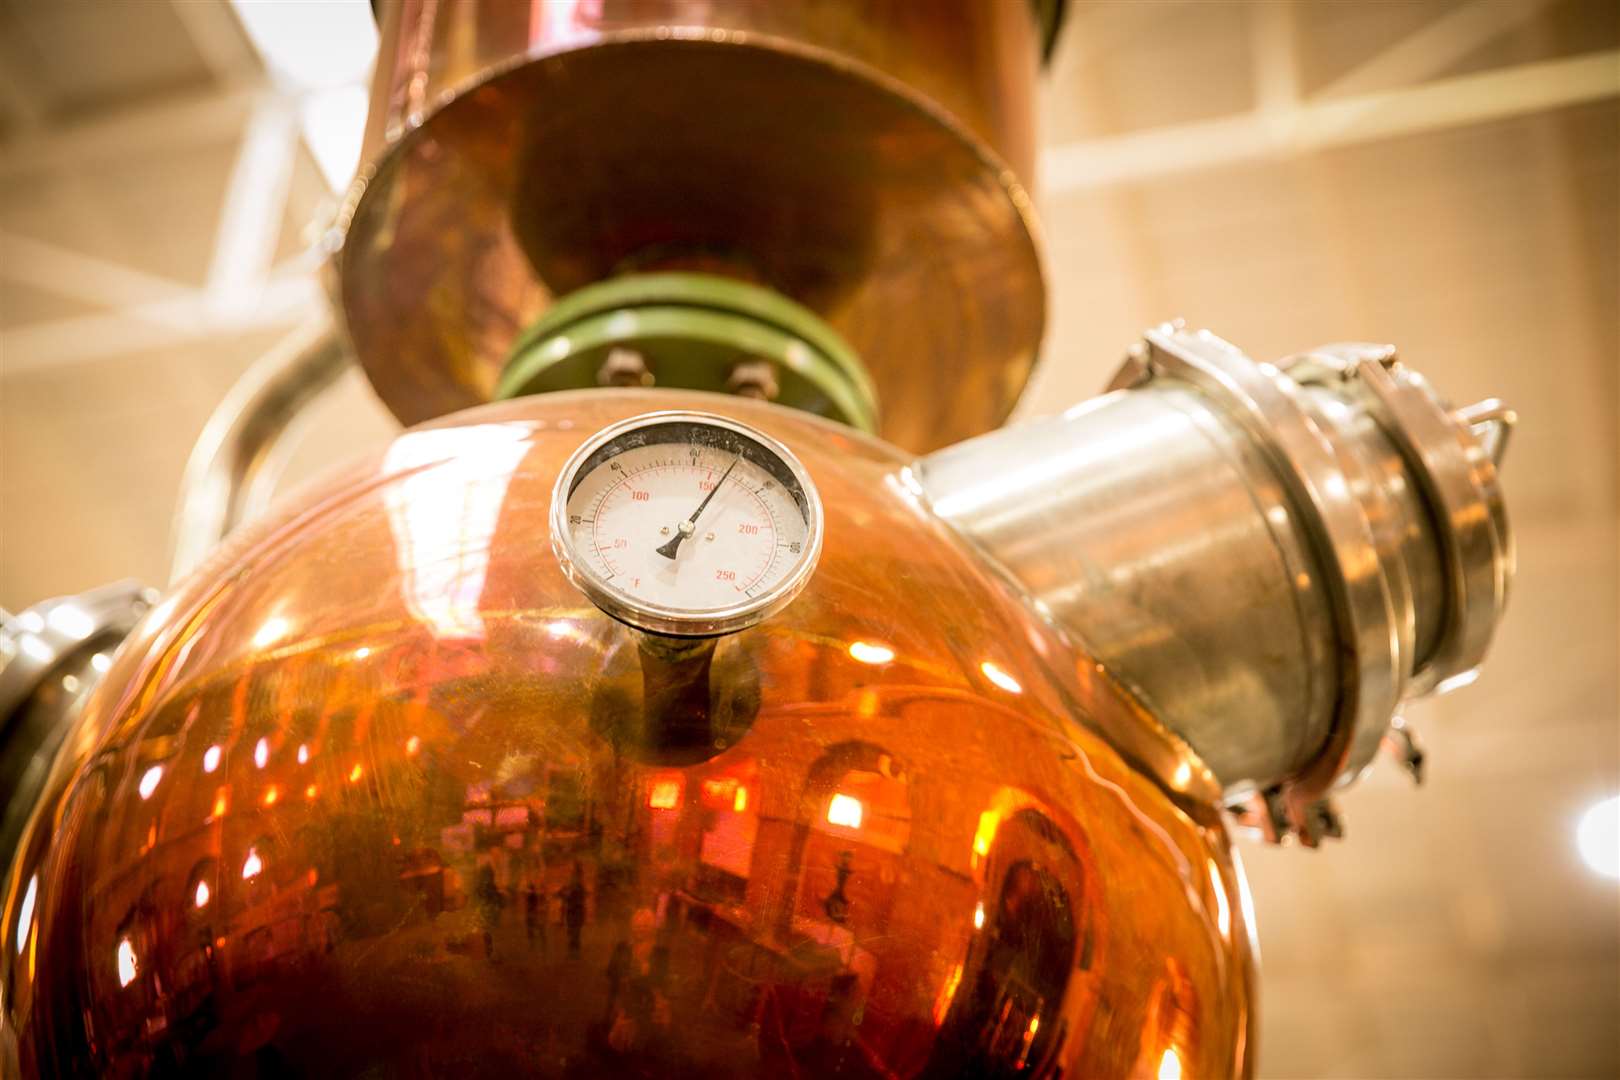 Copper Rivet brewing the traditional way. Picture: matthewwalkerphotography.com